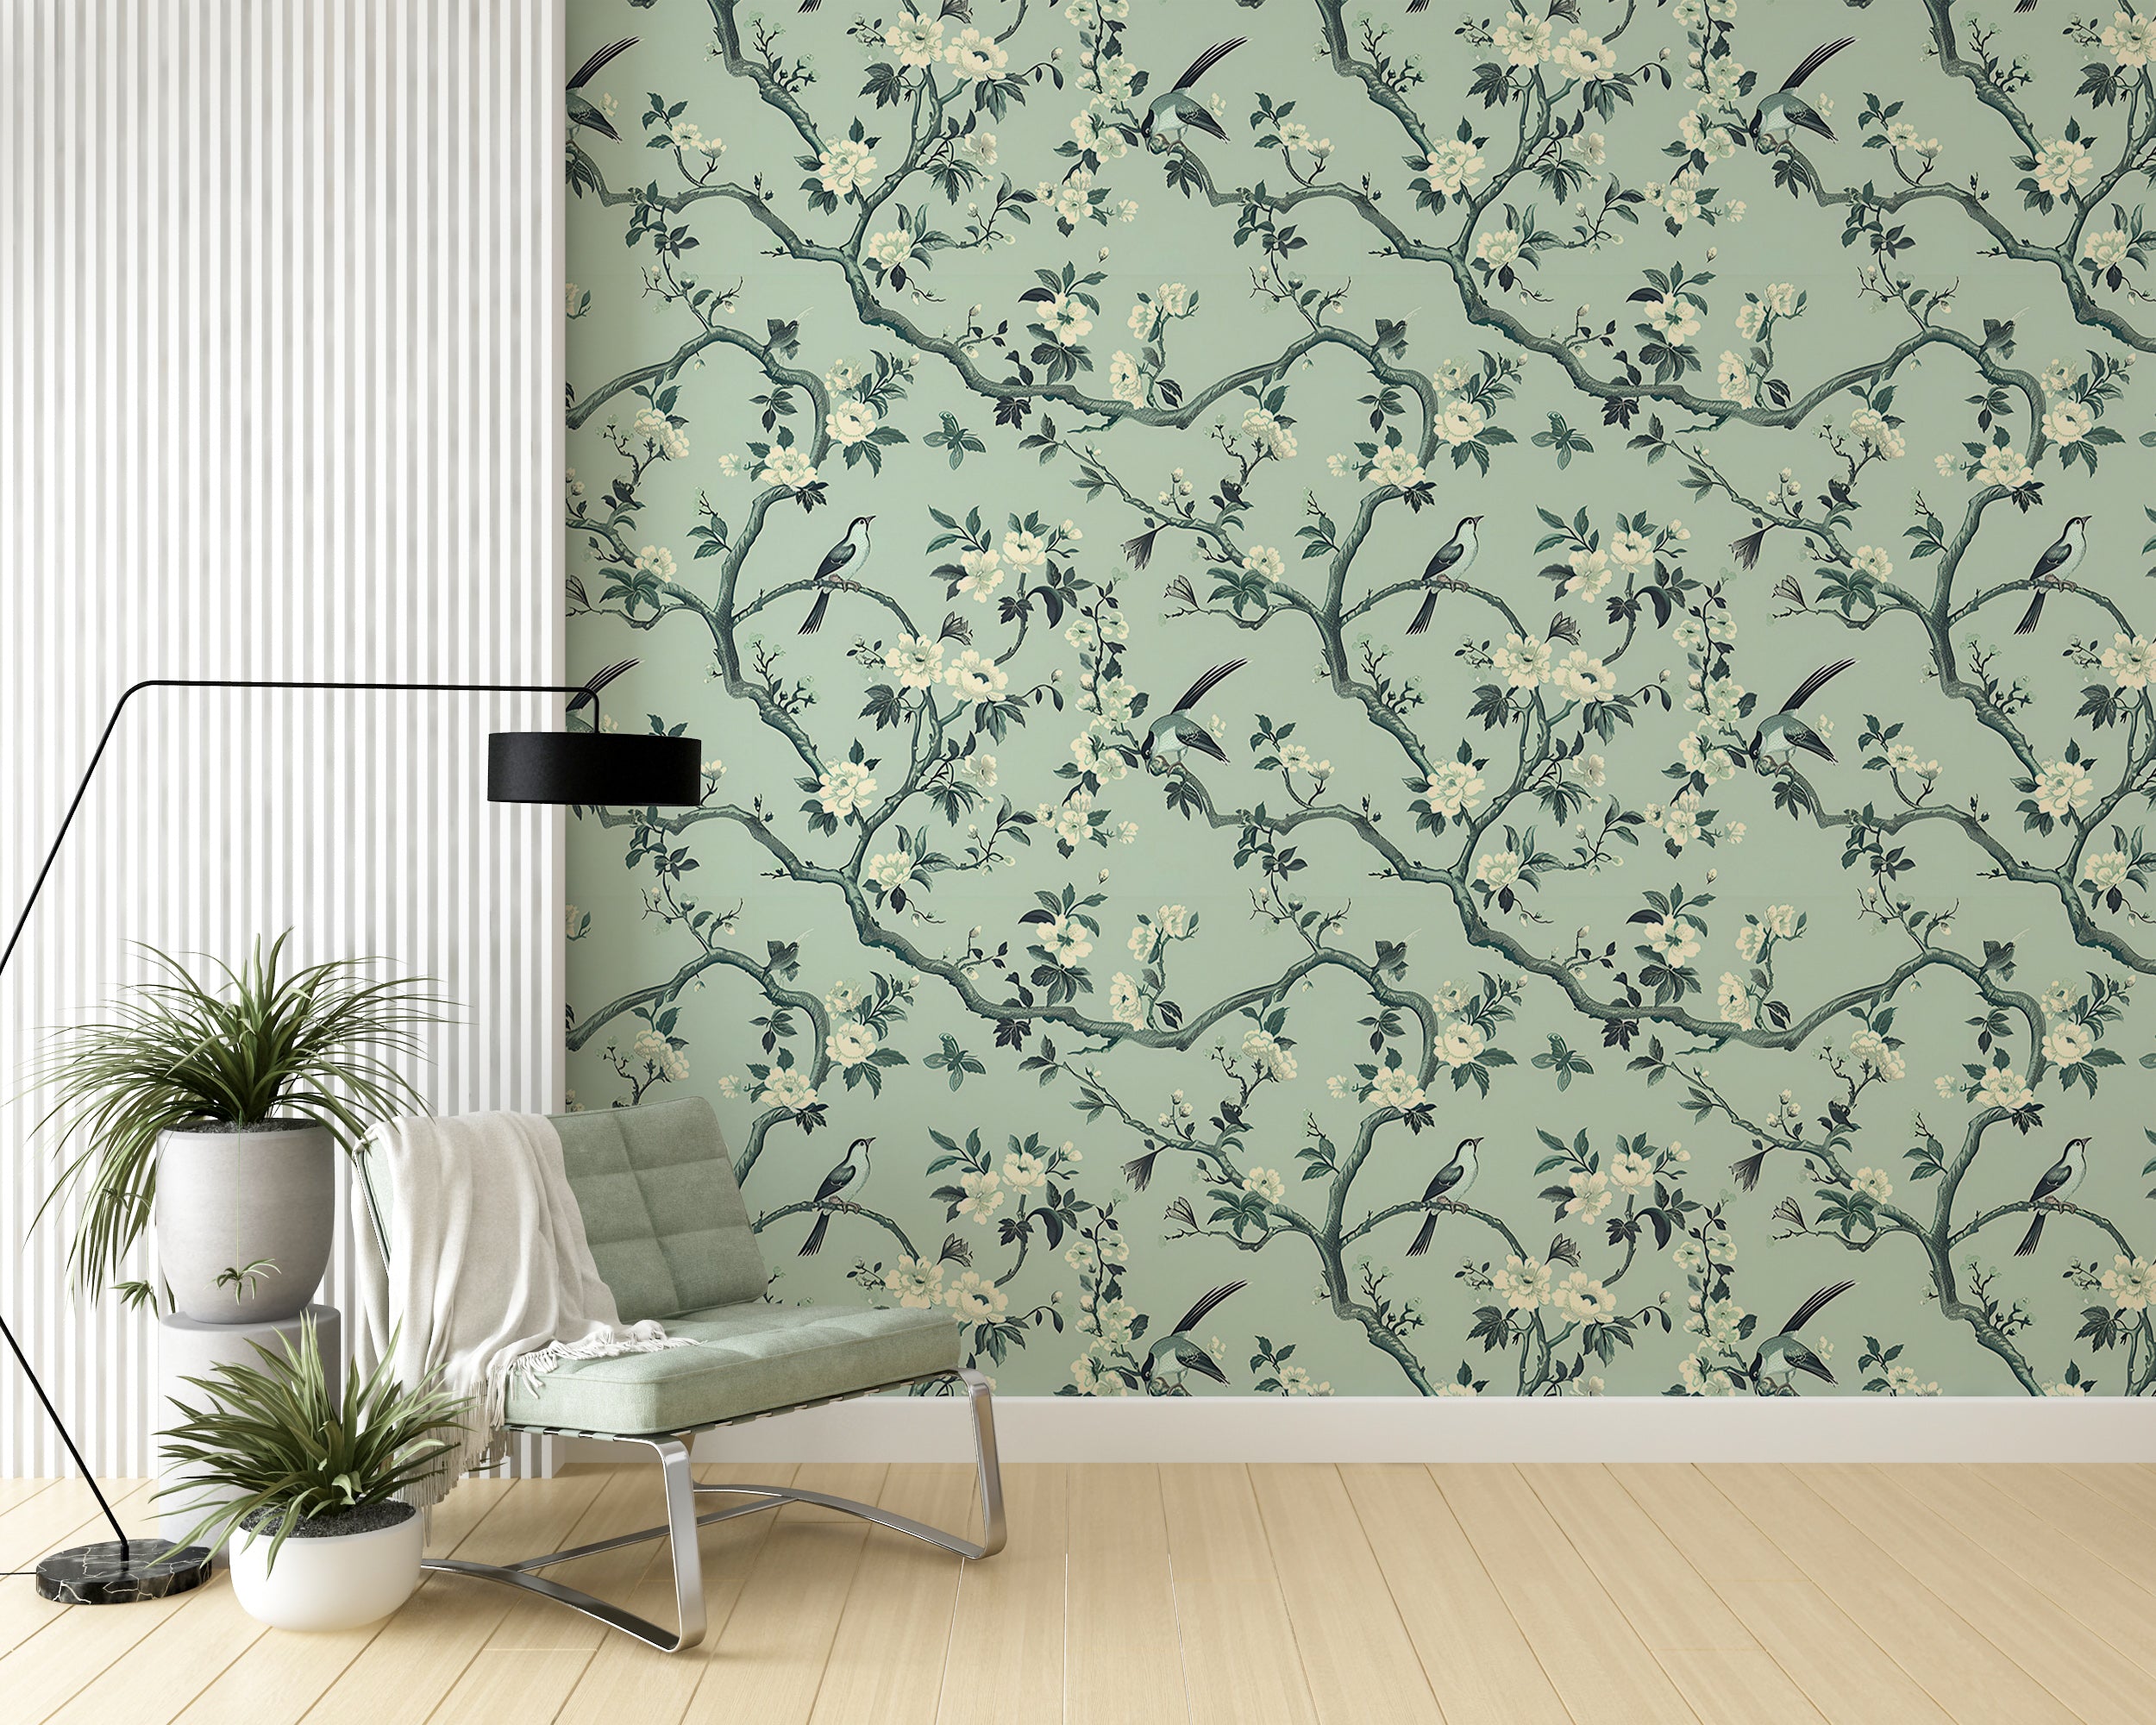 Classic Japanese floral wallpaper